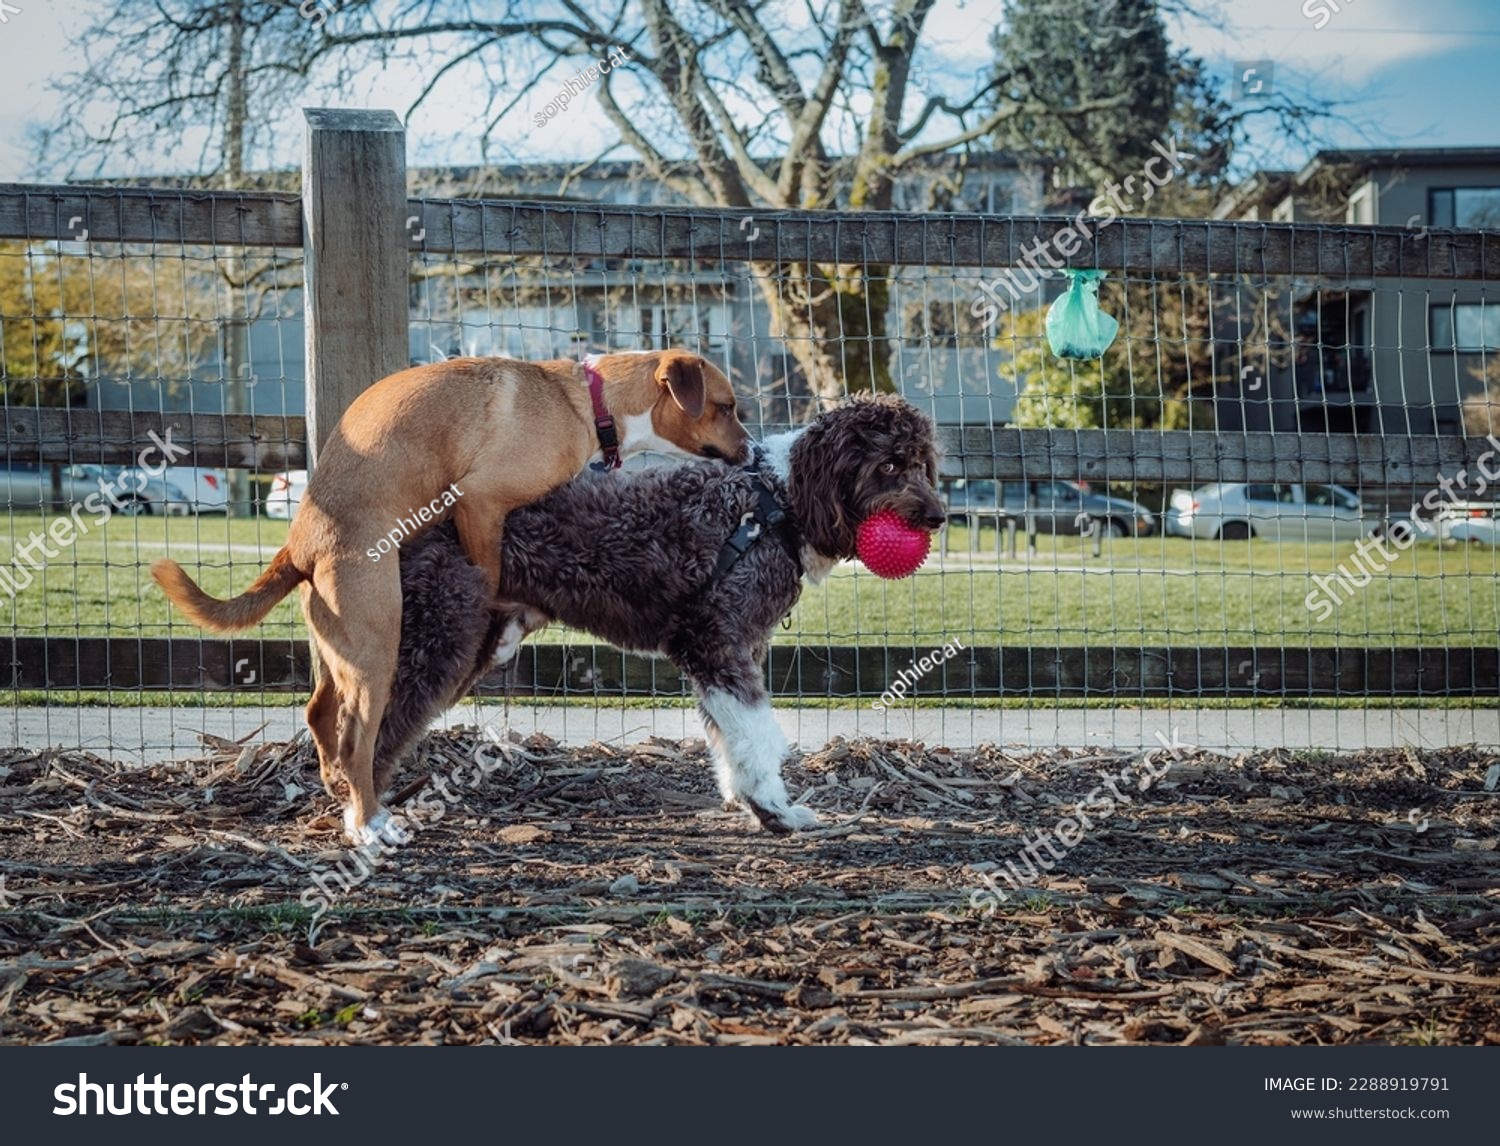 Female dog humps male dog at the dog park. Side view of female puppy mounting, bumping or grinding on unfixed male dog. Playtime or dominance. 1 year old harrier mix and 2 year old Aussiedoodle. #2288919791